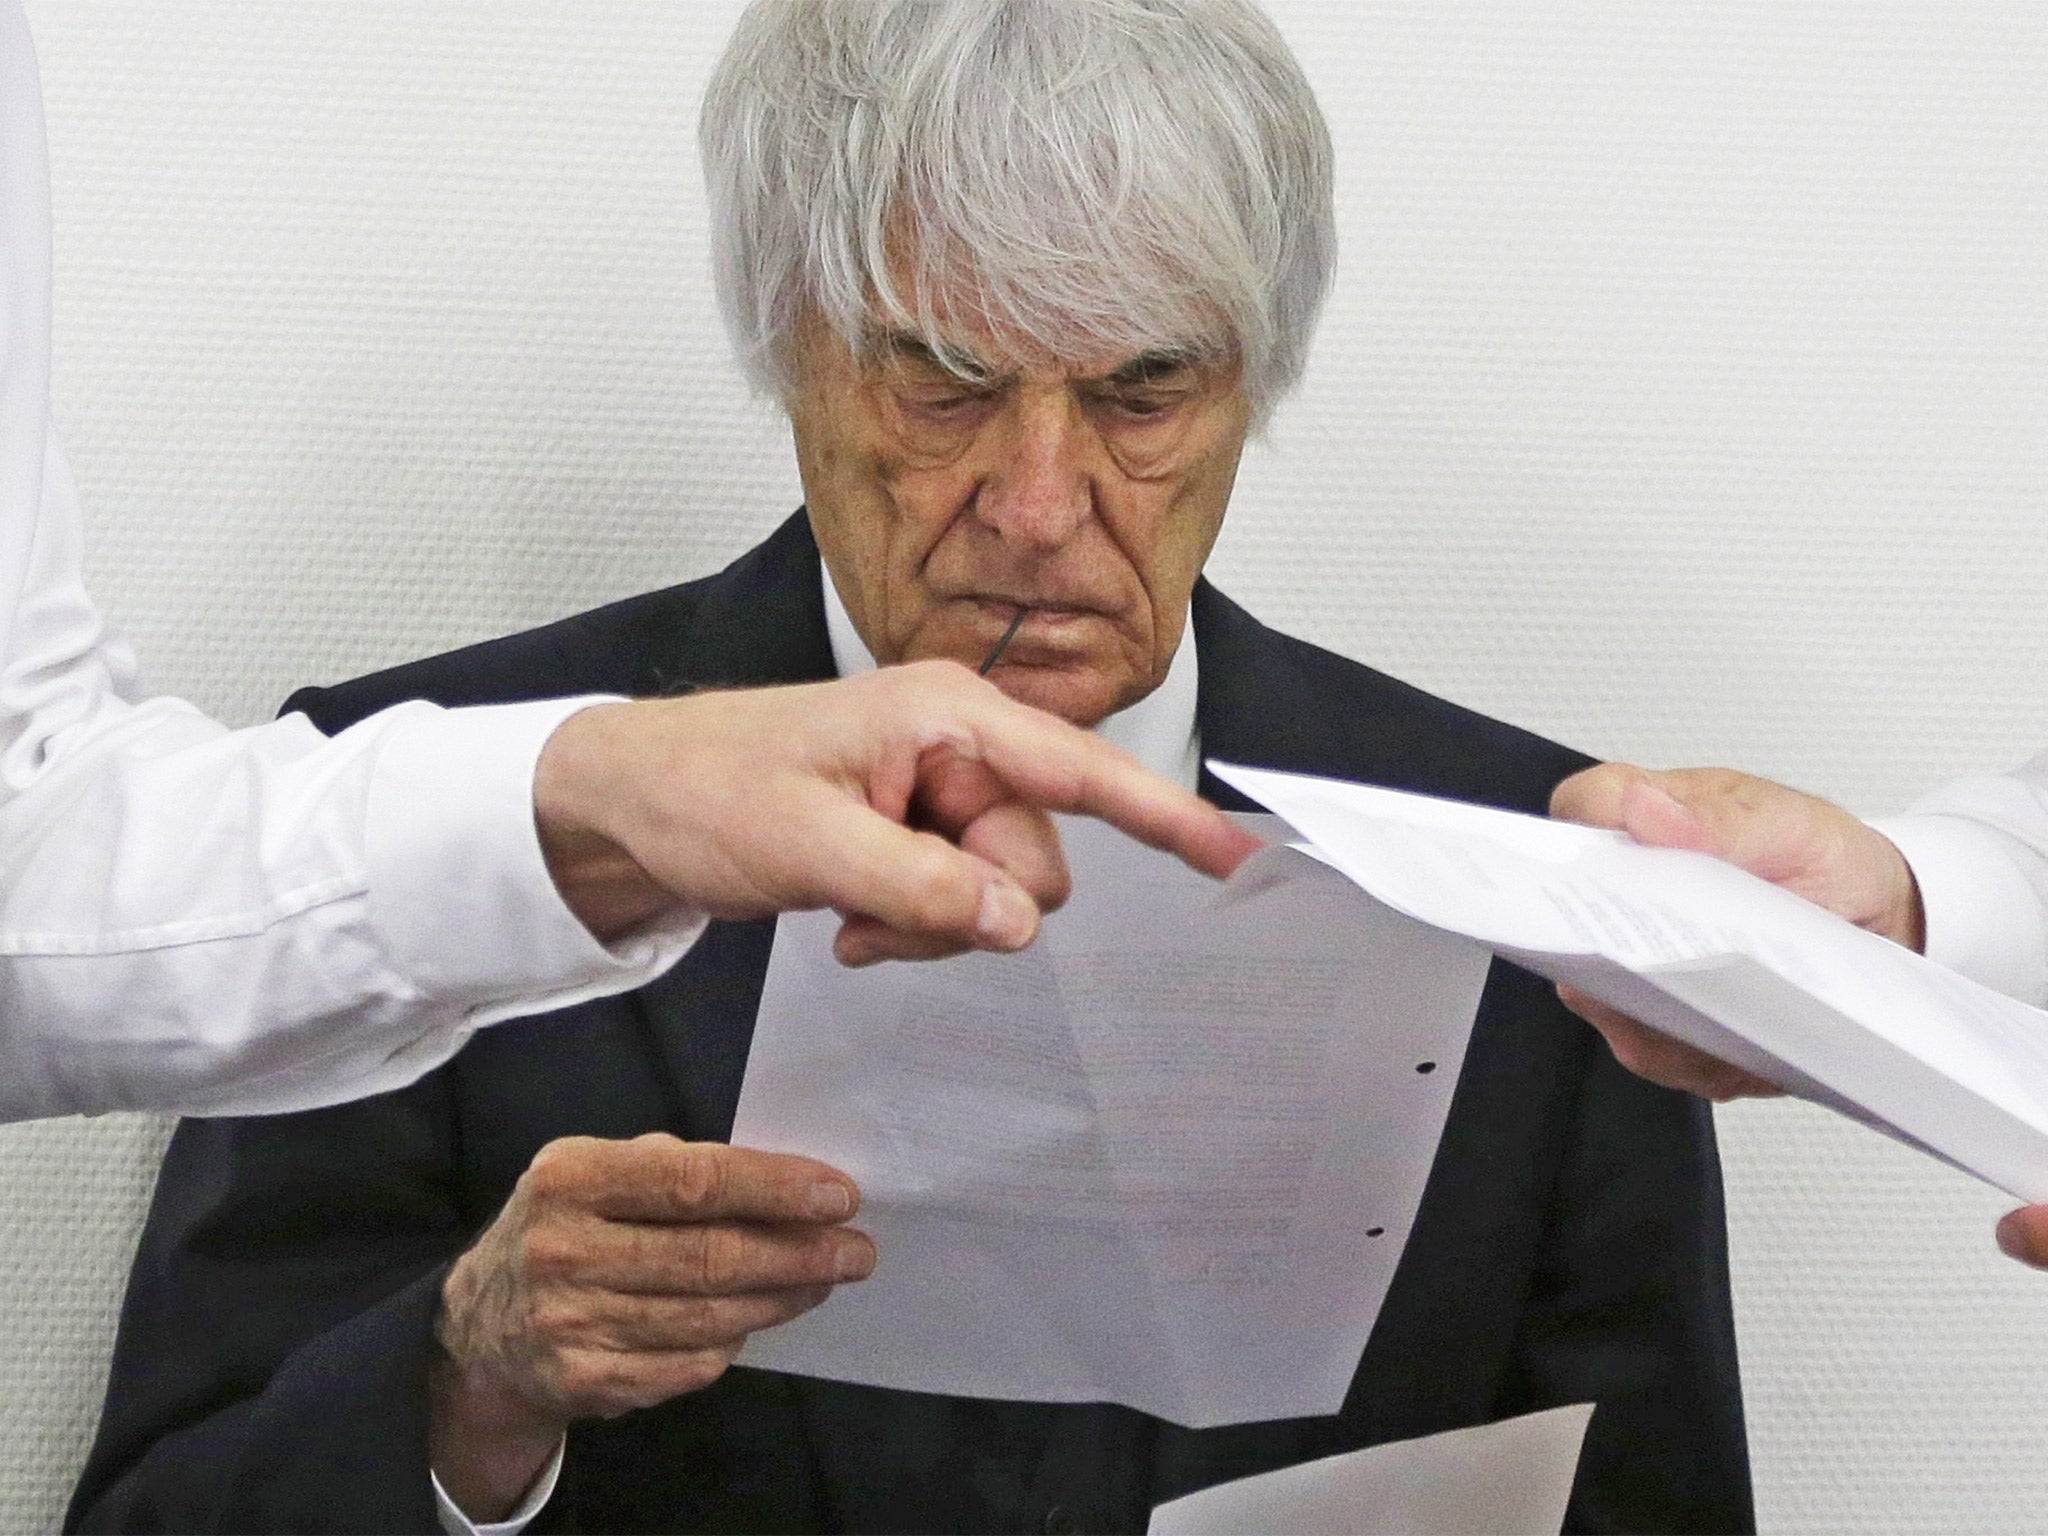 Bernie Ecclestone claims he is a victim of blackmail